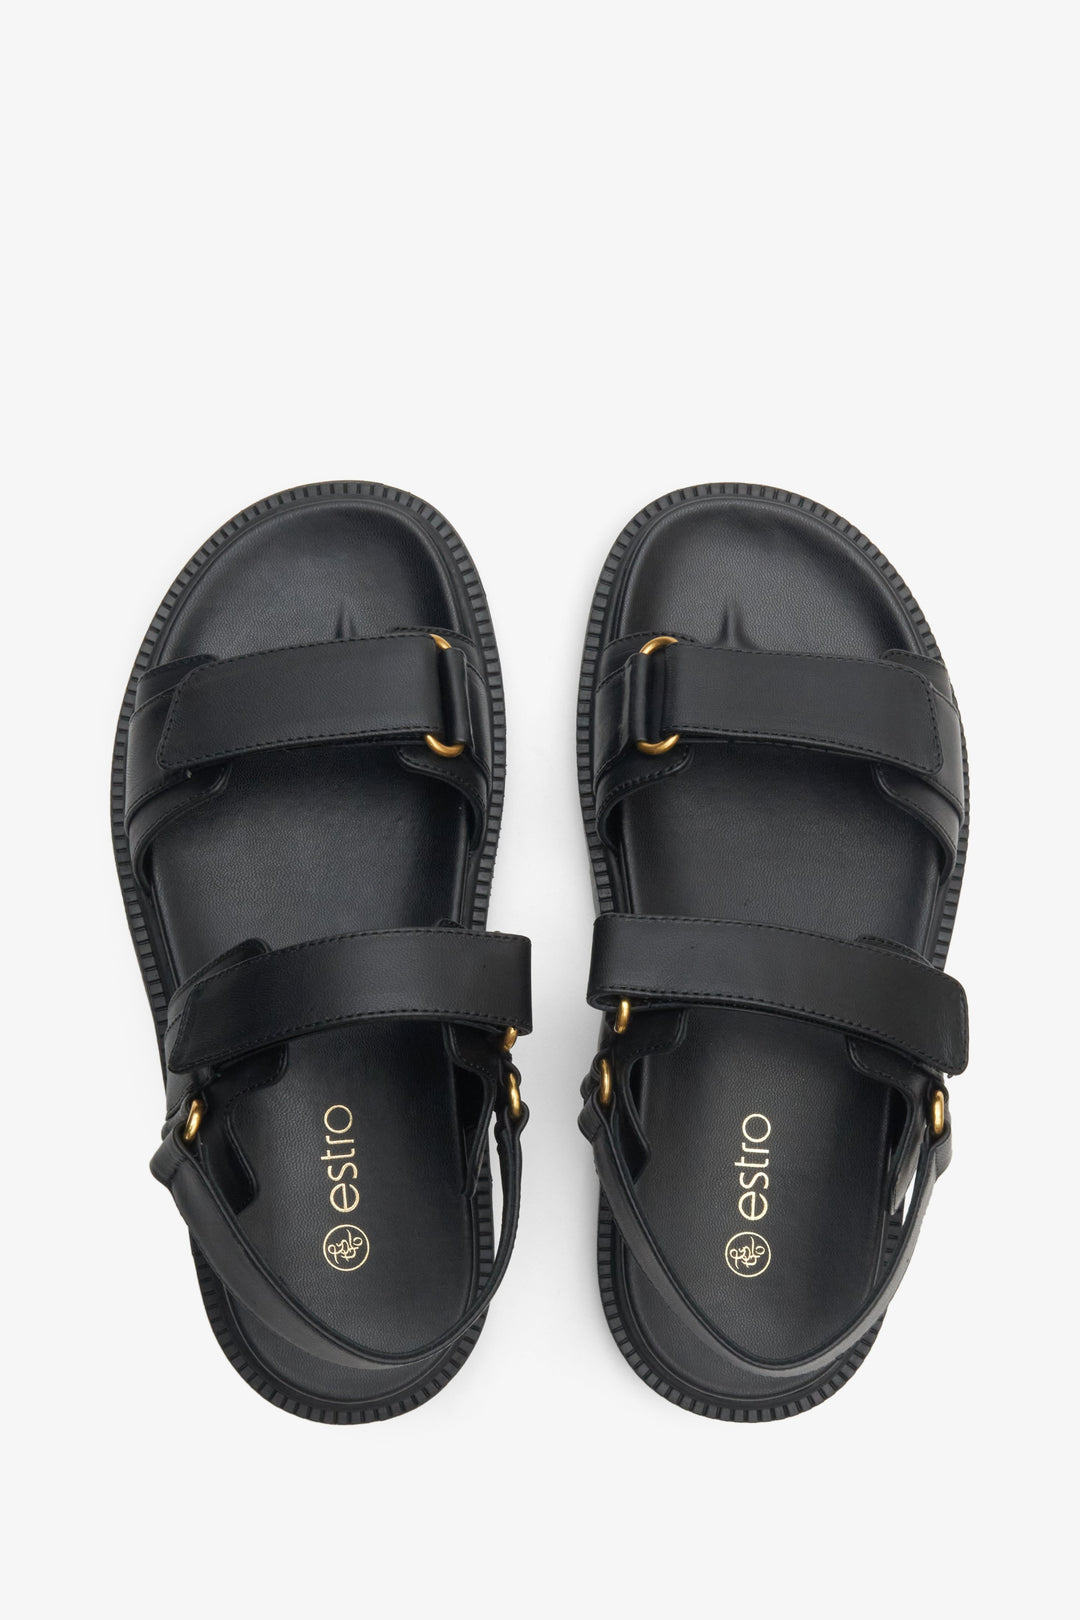  Women's black sandals made of genuine leather with a flexible sole and golden elements.